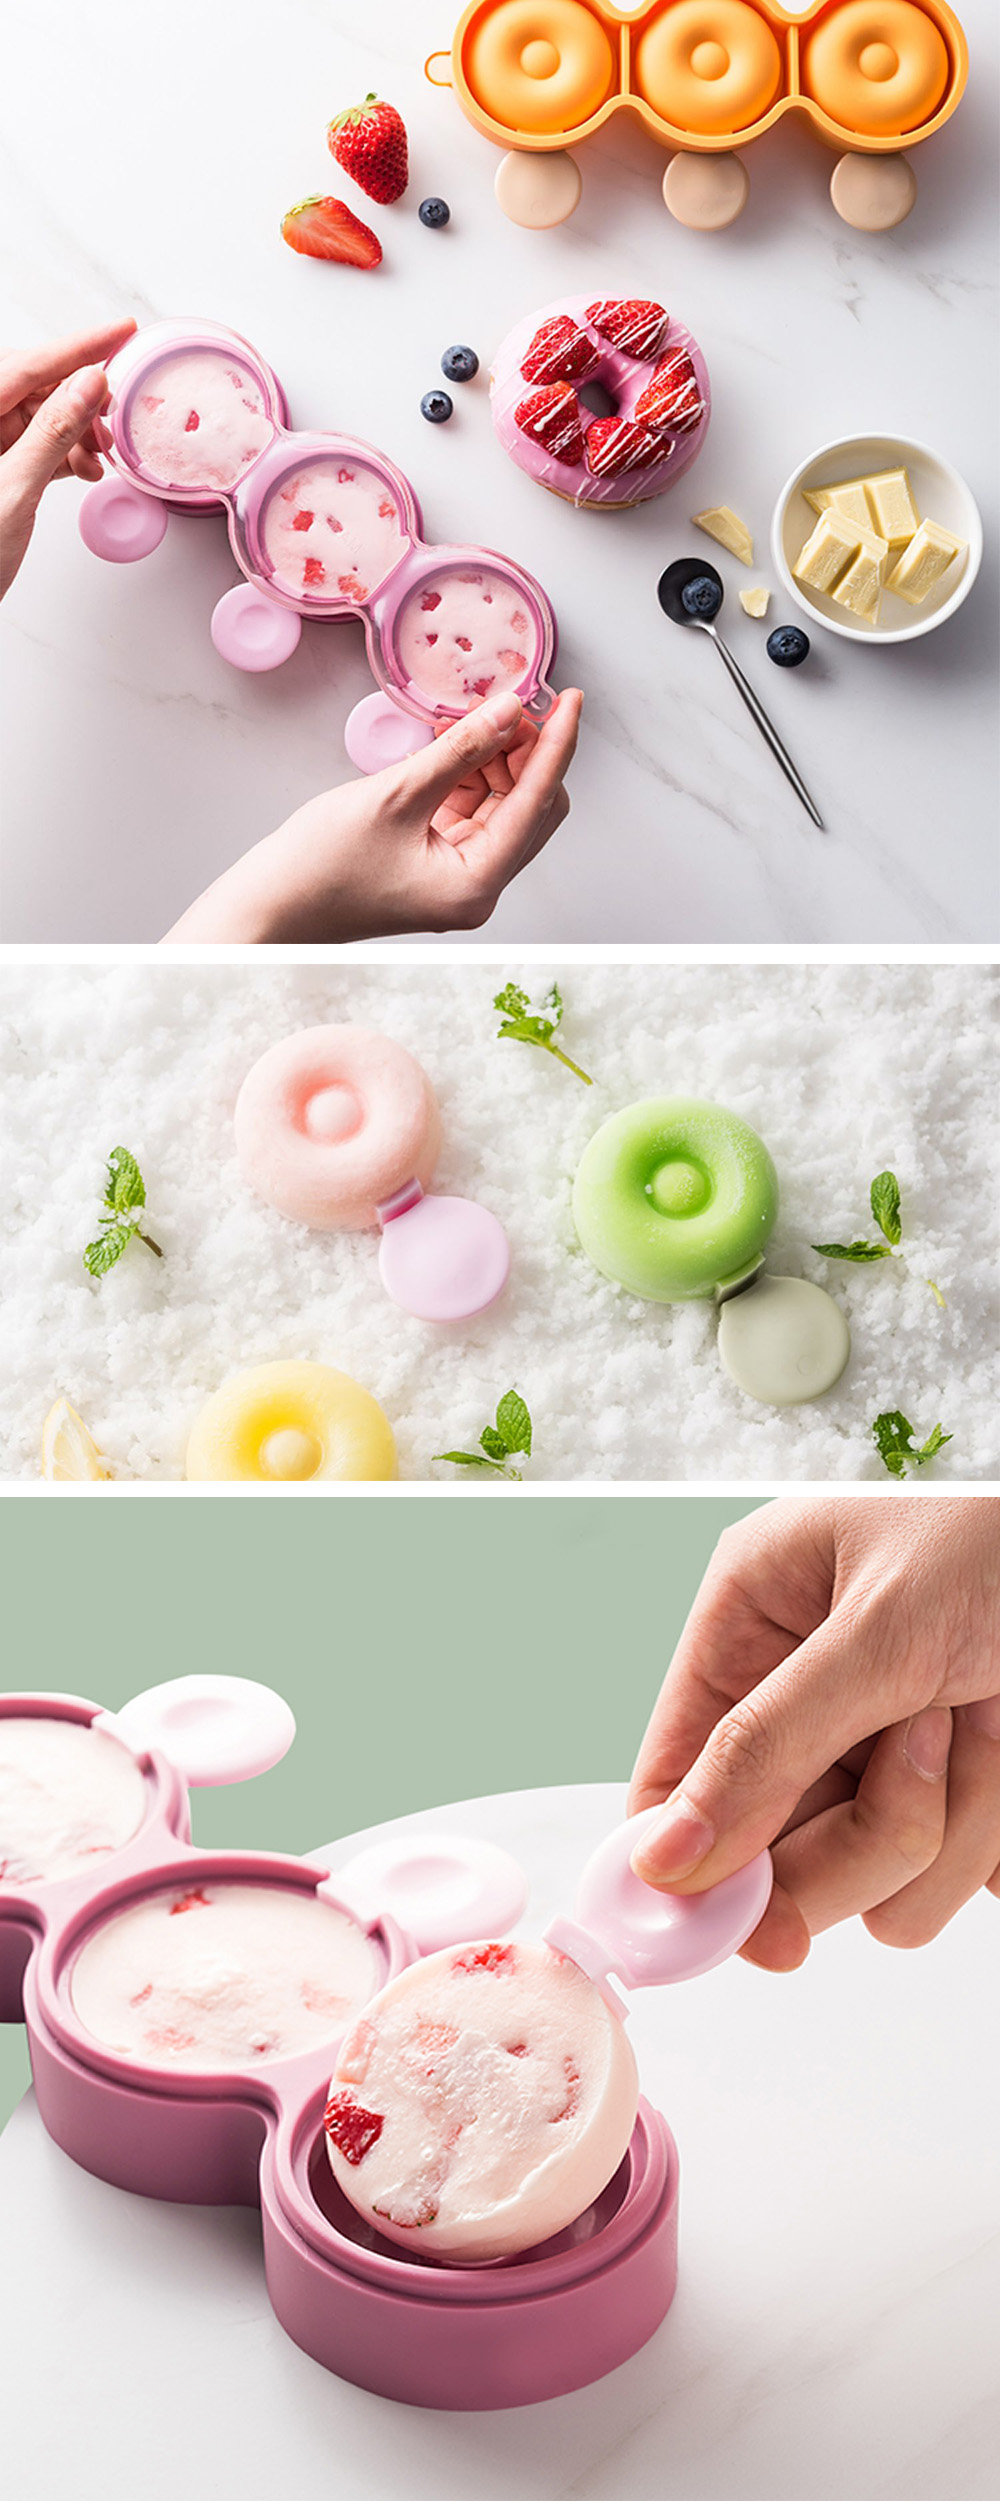 ABL Light Bulb Shape Ice Cube Frozen Mold/Spherical Jelly Ice Cream DIY  Mould/Creative Summer Home Ice Ball Making Accessories